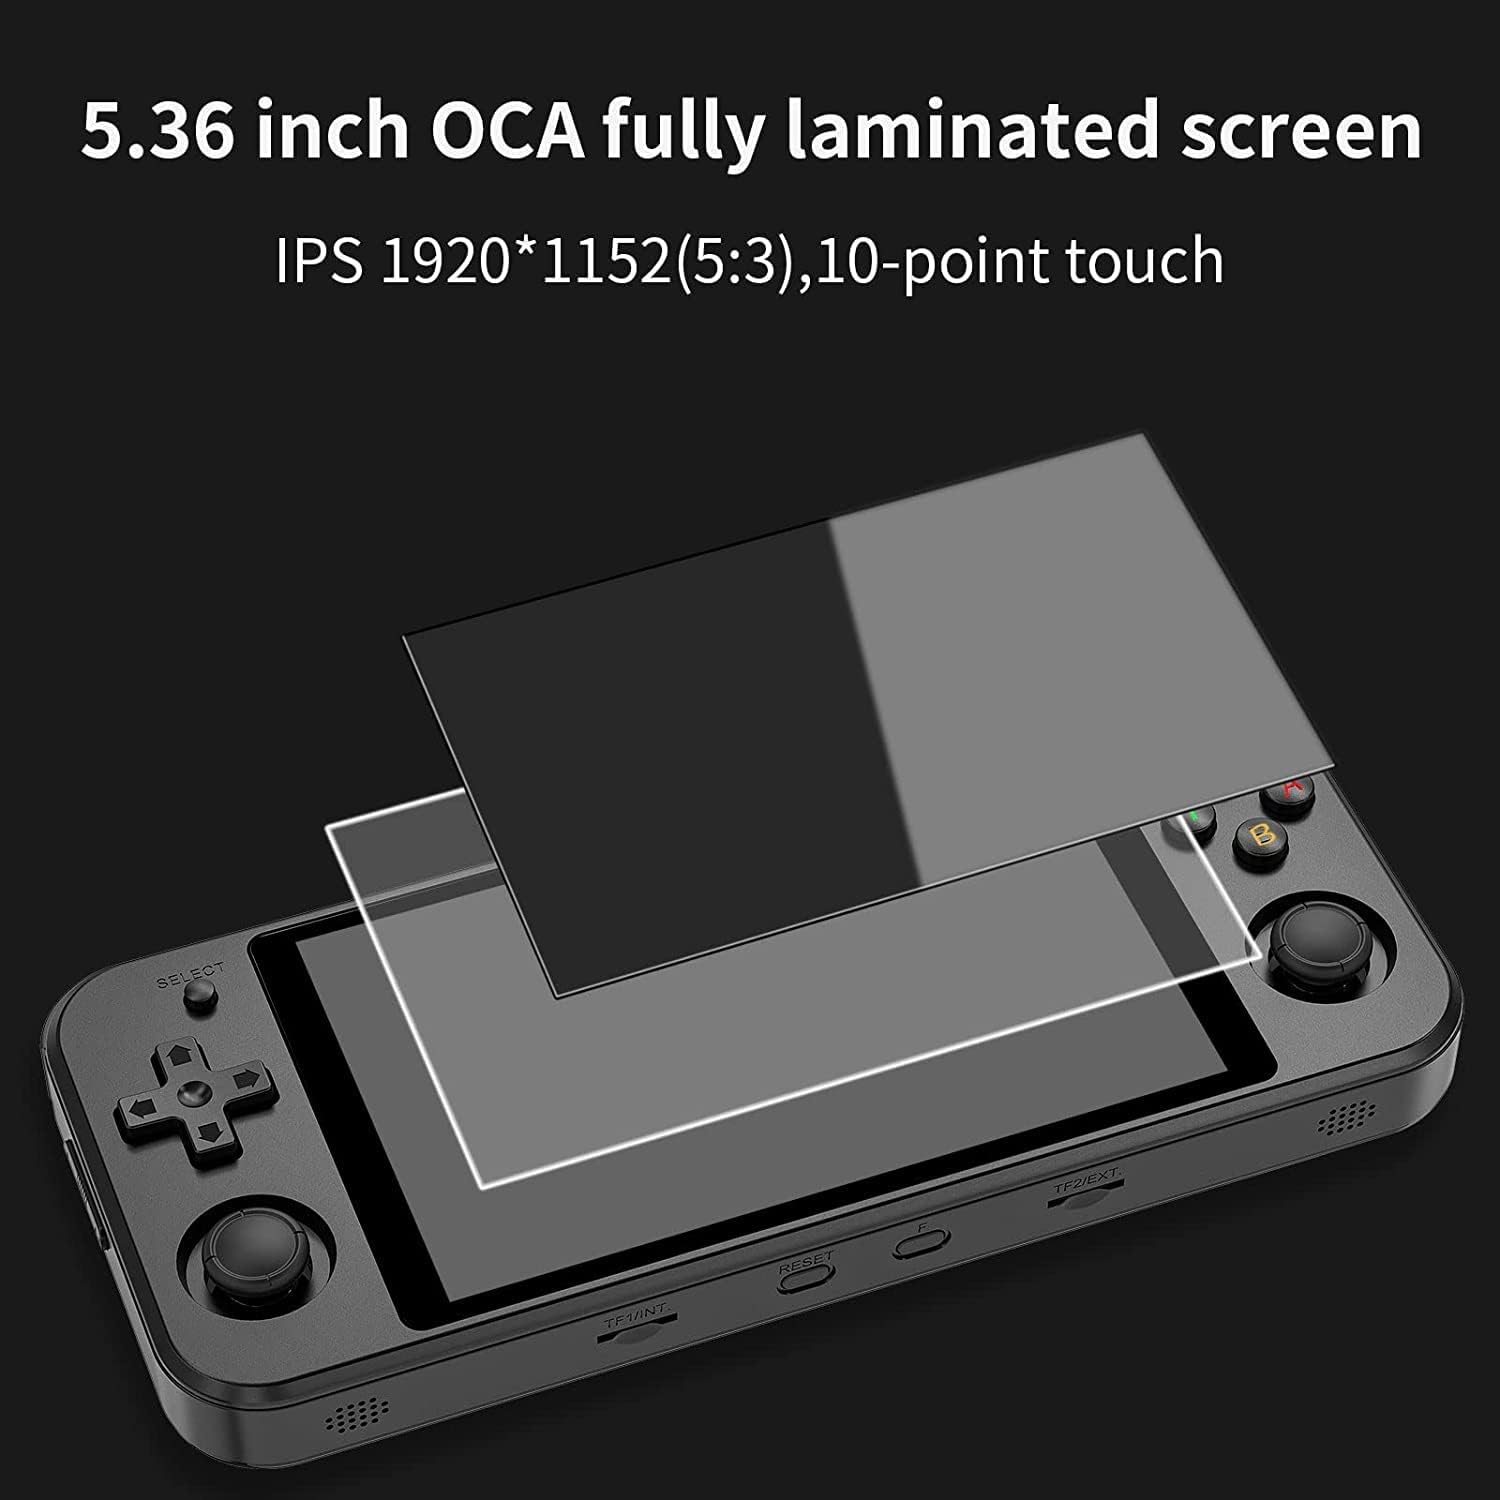 RG522 Handheld Game Console Support Android7.1 Open Source System RK3399 Chip 64G TF Card 2500 Classic Games 5.36 Inch IPS Screen 2PCS 3200mAh Battery (Black) review